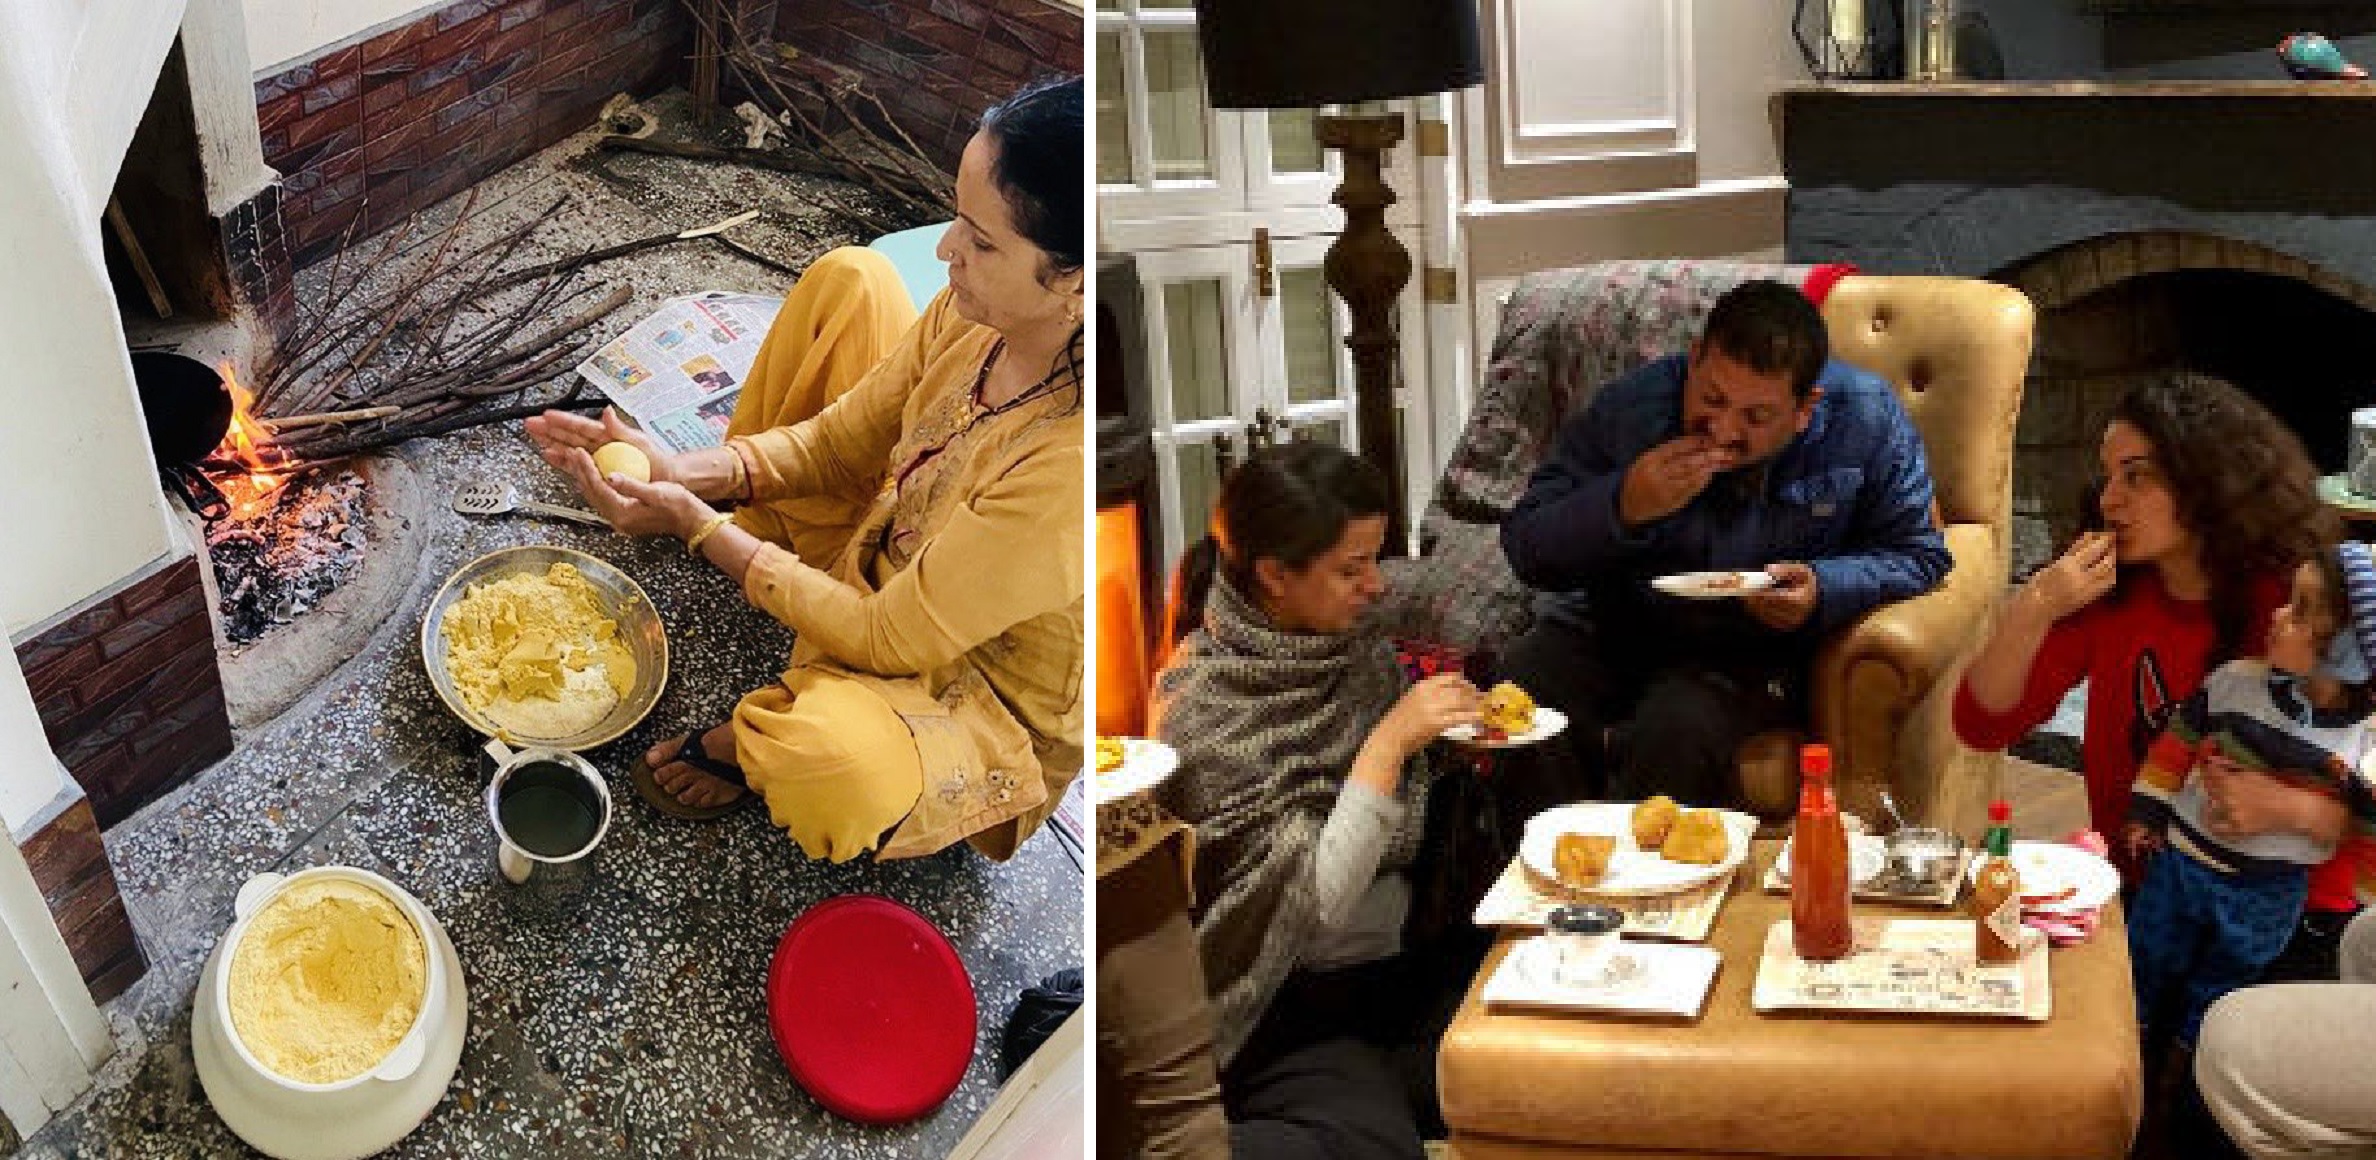 Kangana Ranaut Shows Her Family’s ‘Simple Ways Of Living’ As Her Mother Prepares Roti in a ‘Chulha’